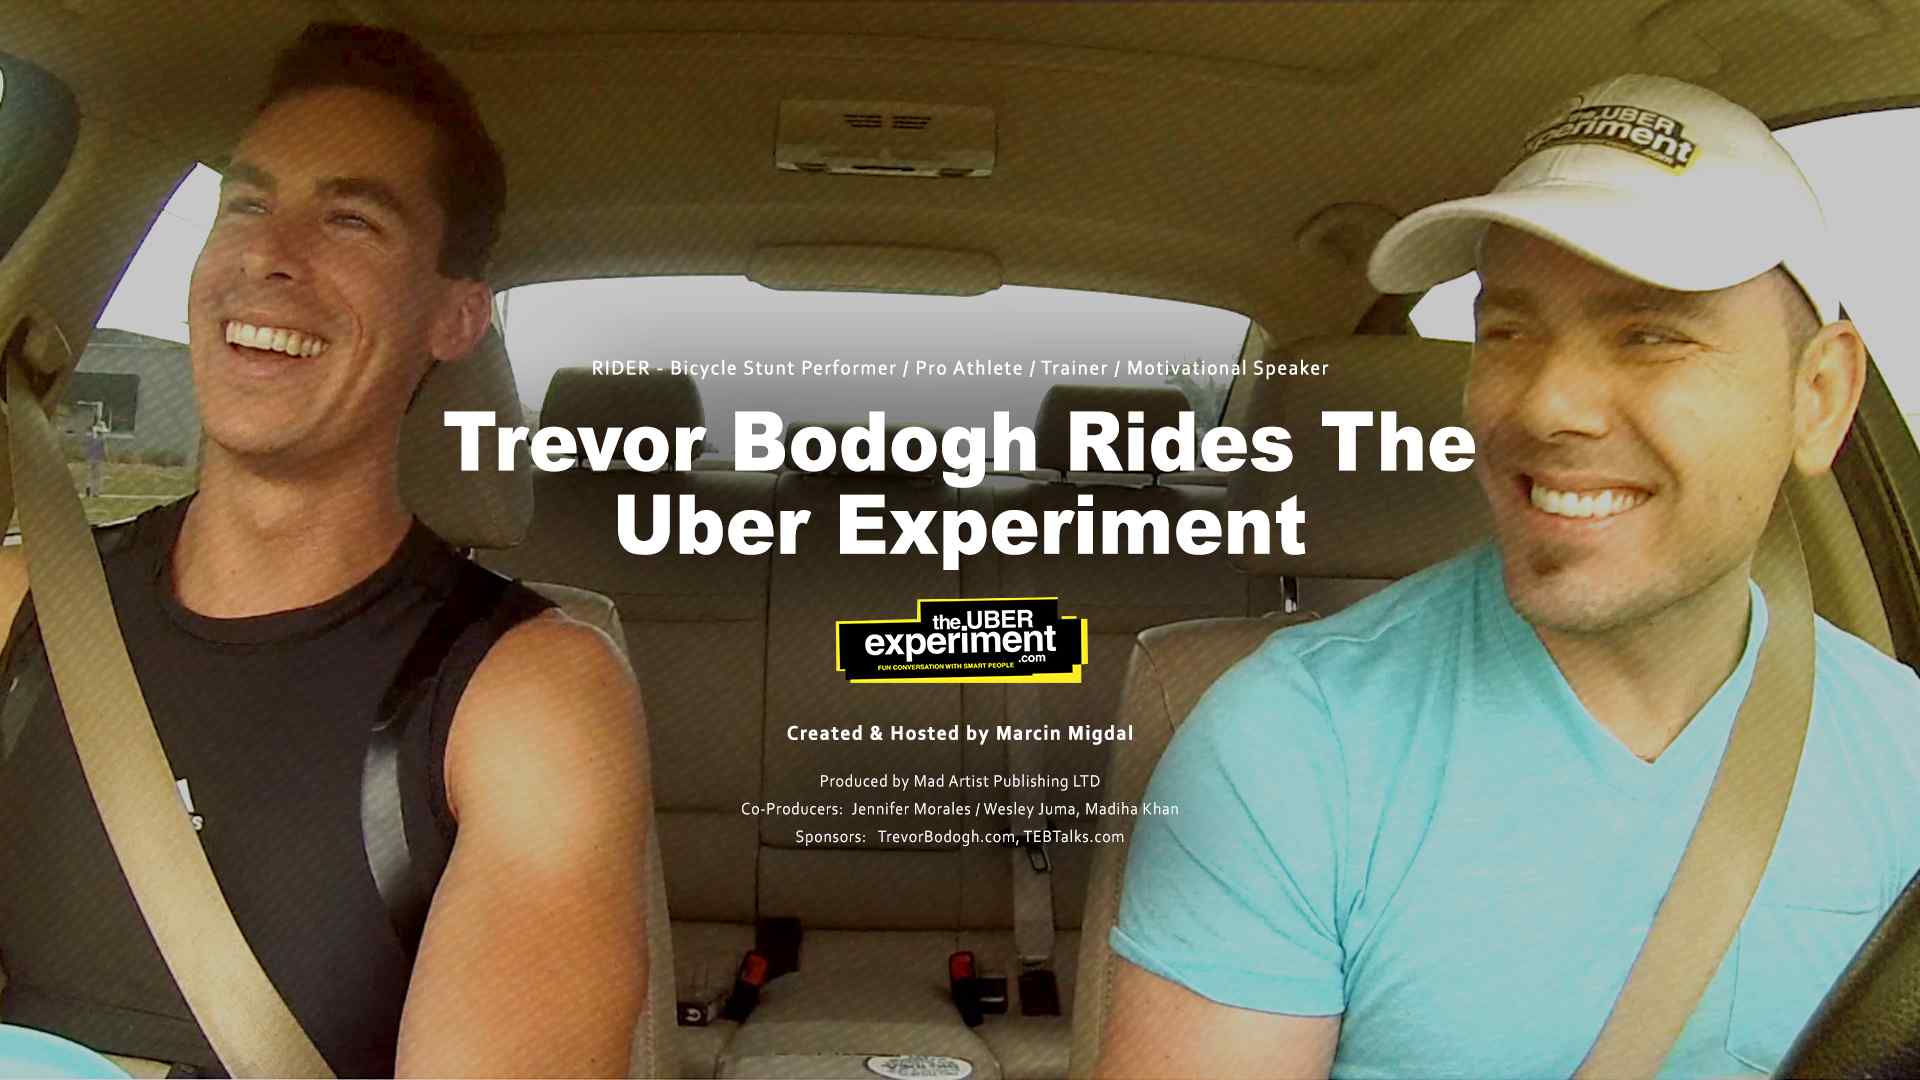 Bicycle stunt performer & trainer Trevor Bodogh rides Business Entertainment Show